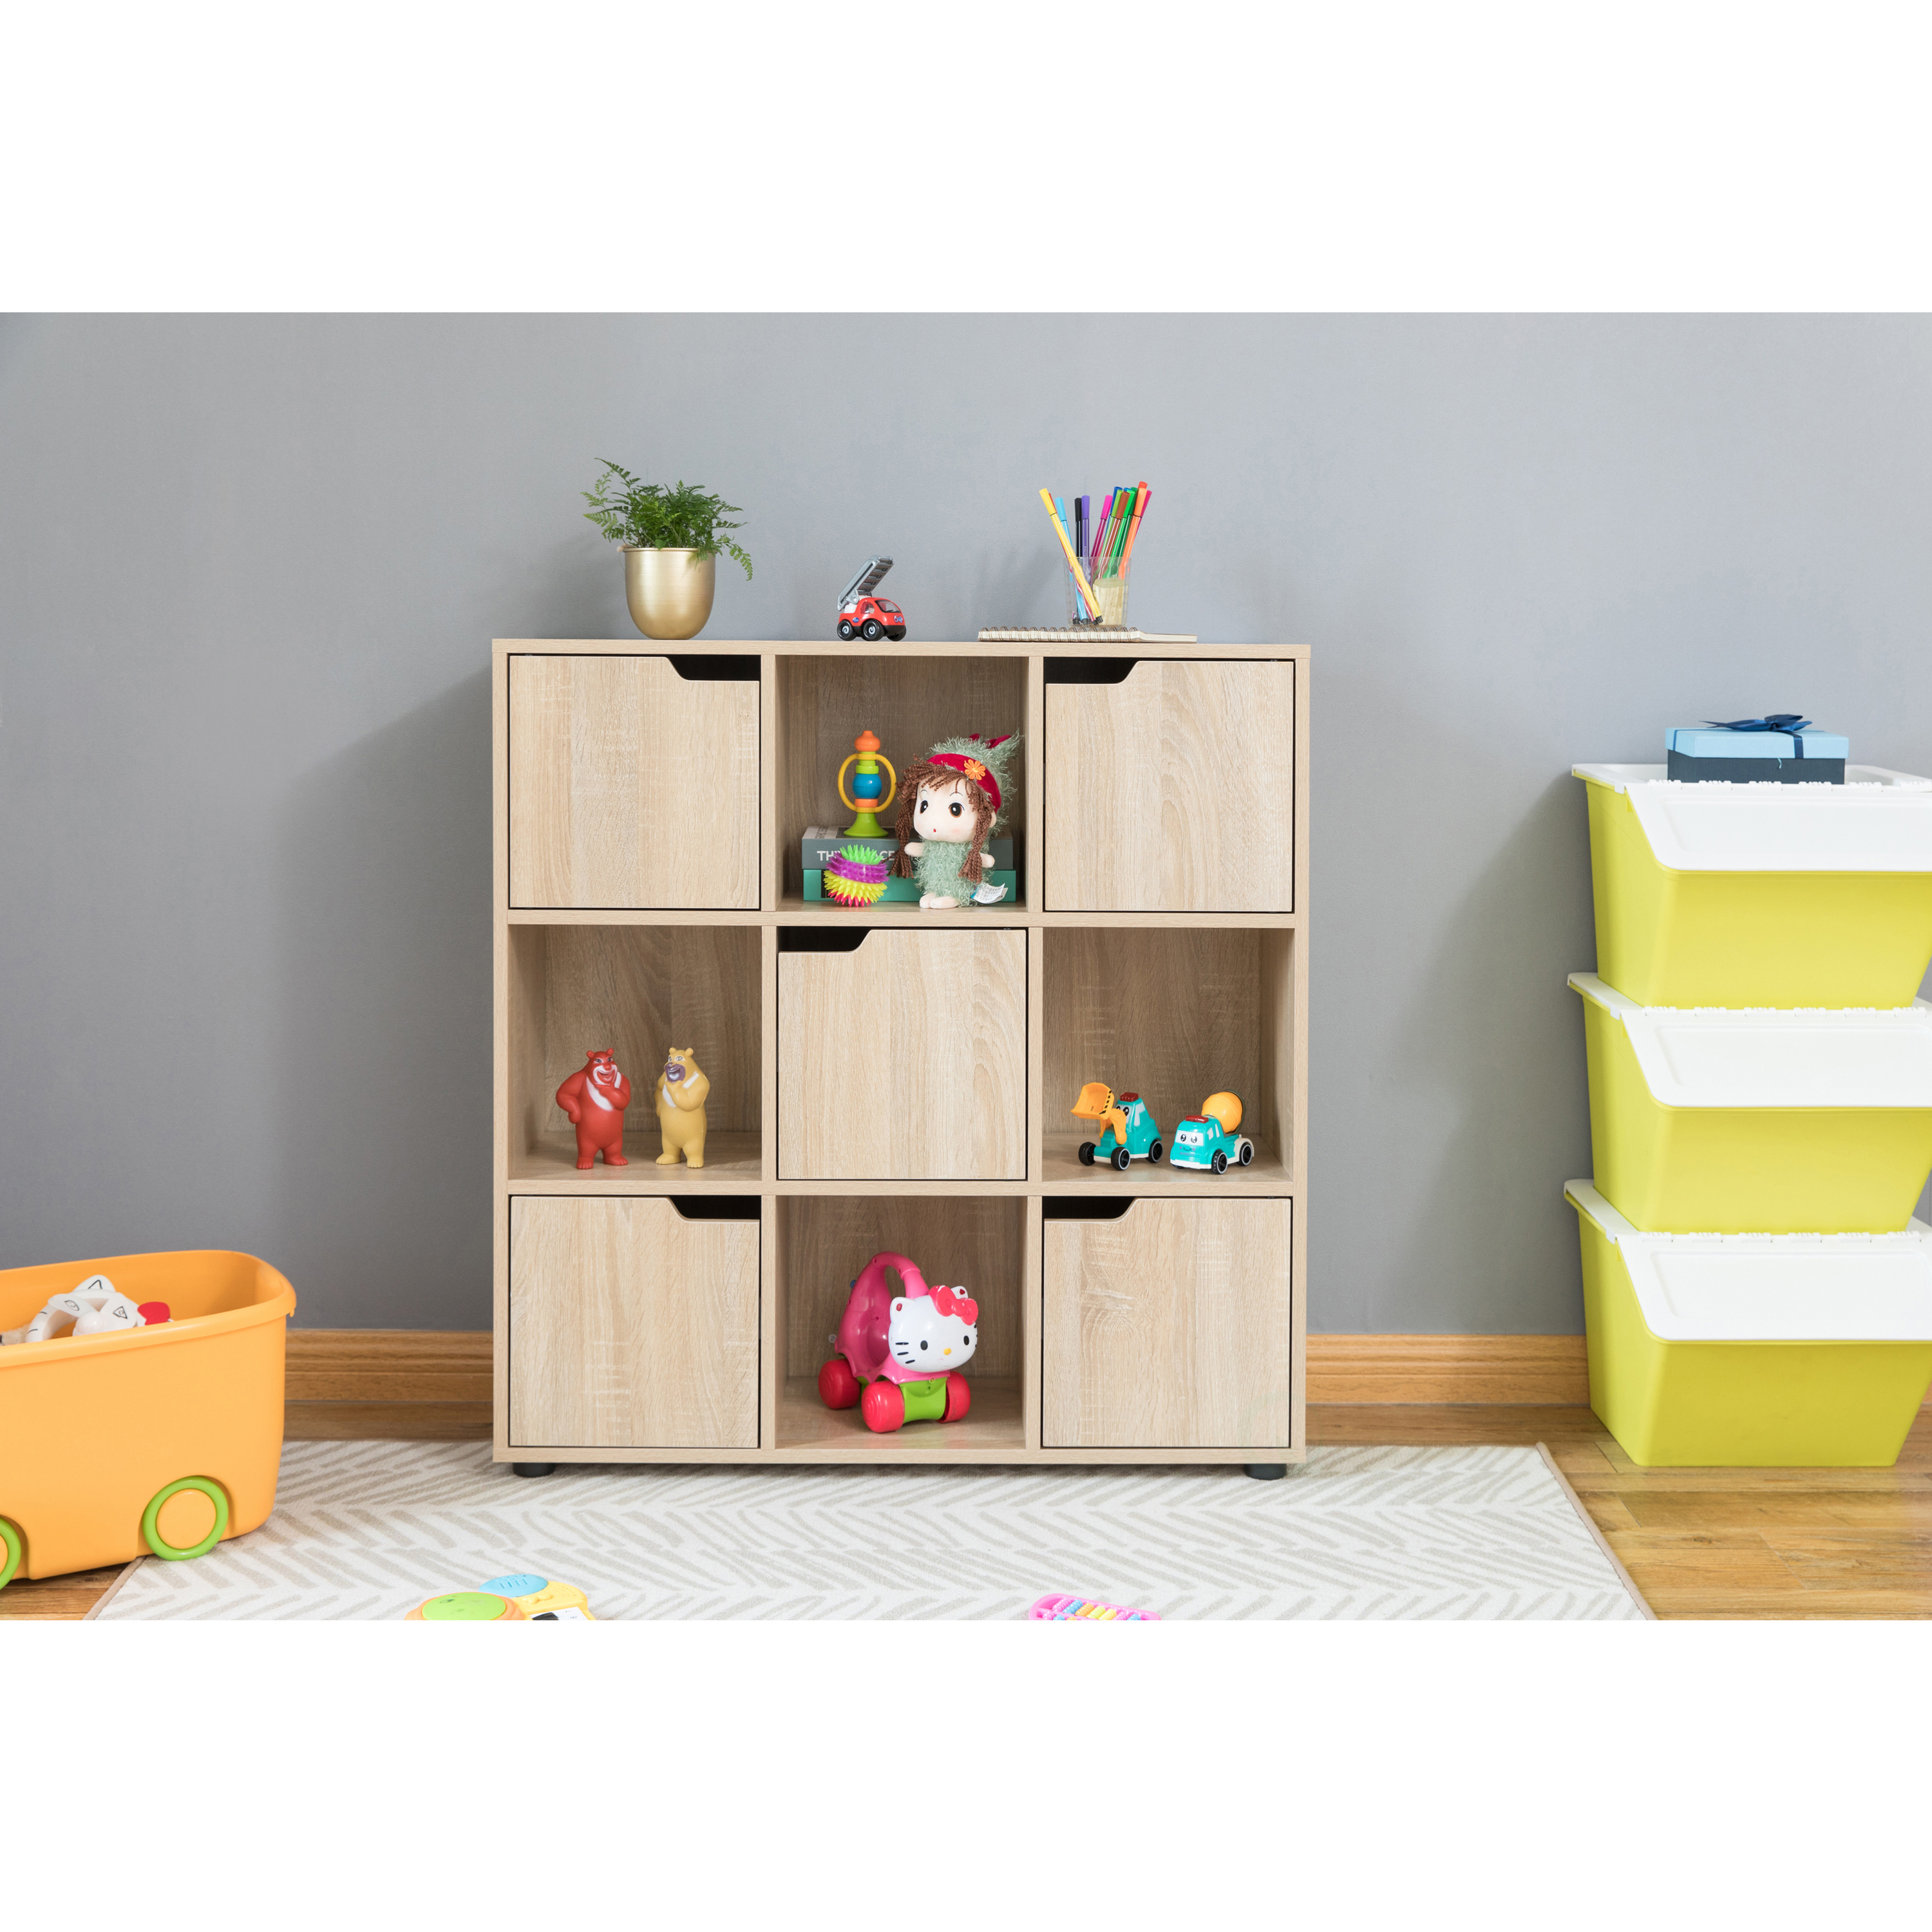 9 Cube Wooden Organizer With 5 Enclosed Doors And 4 Shelves - Oak